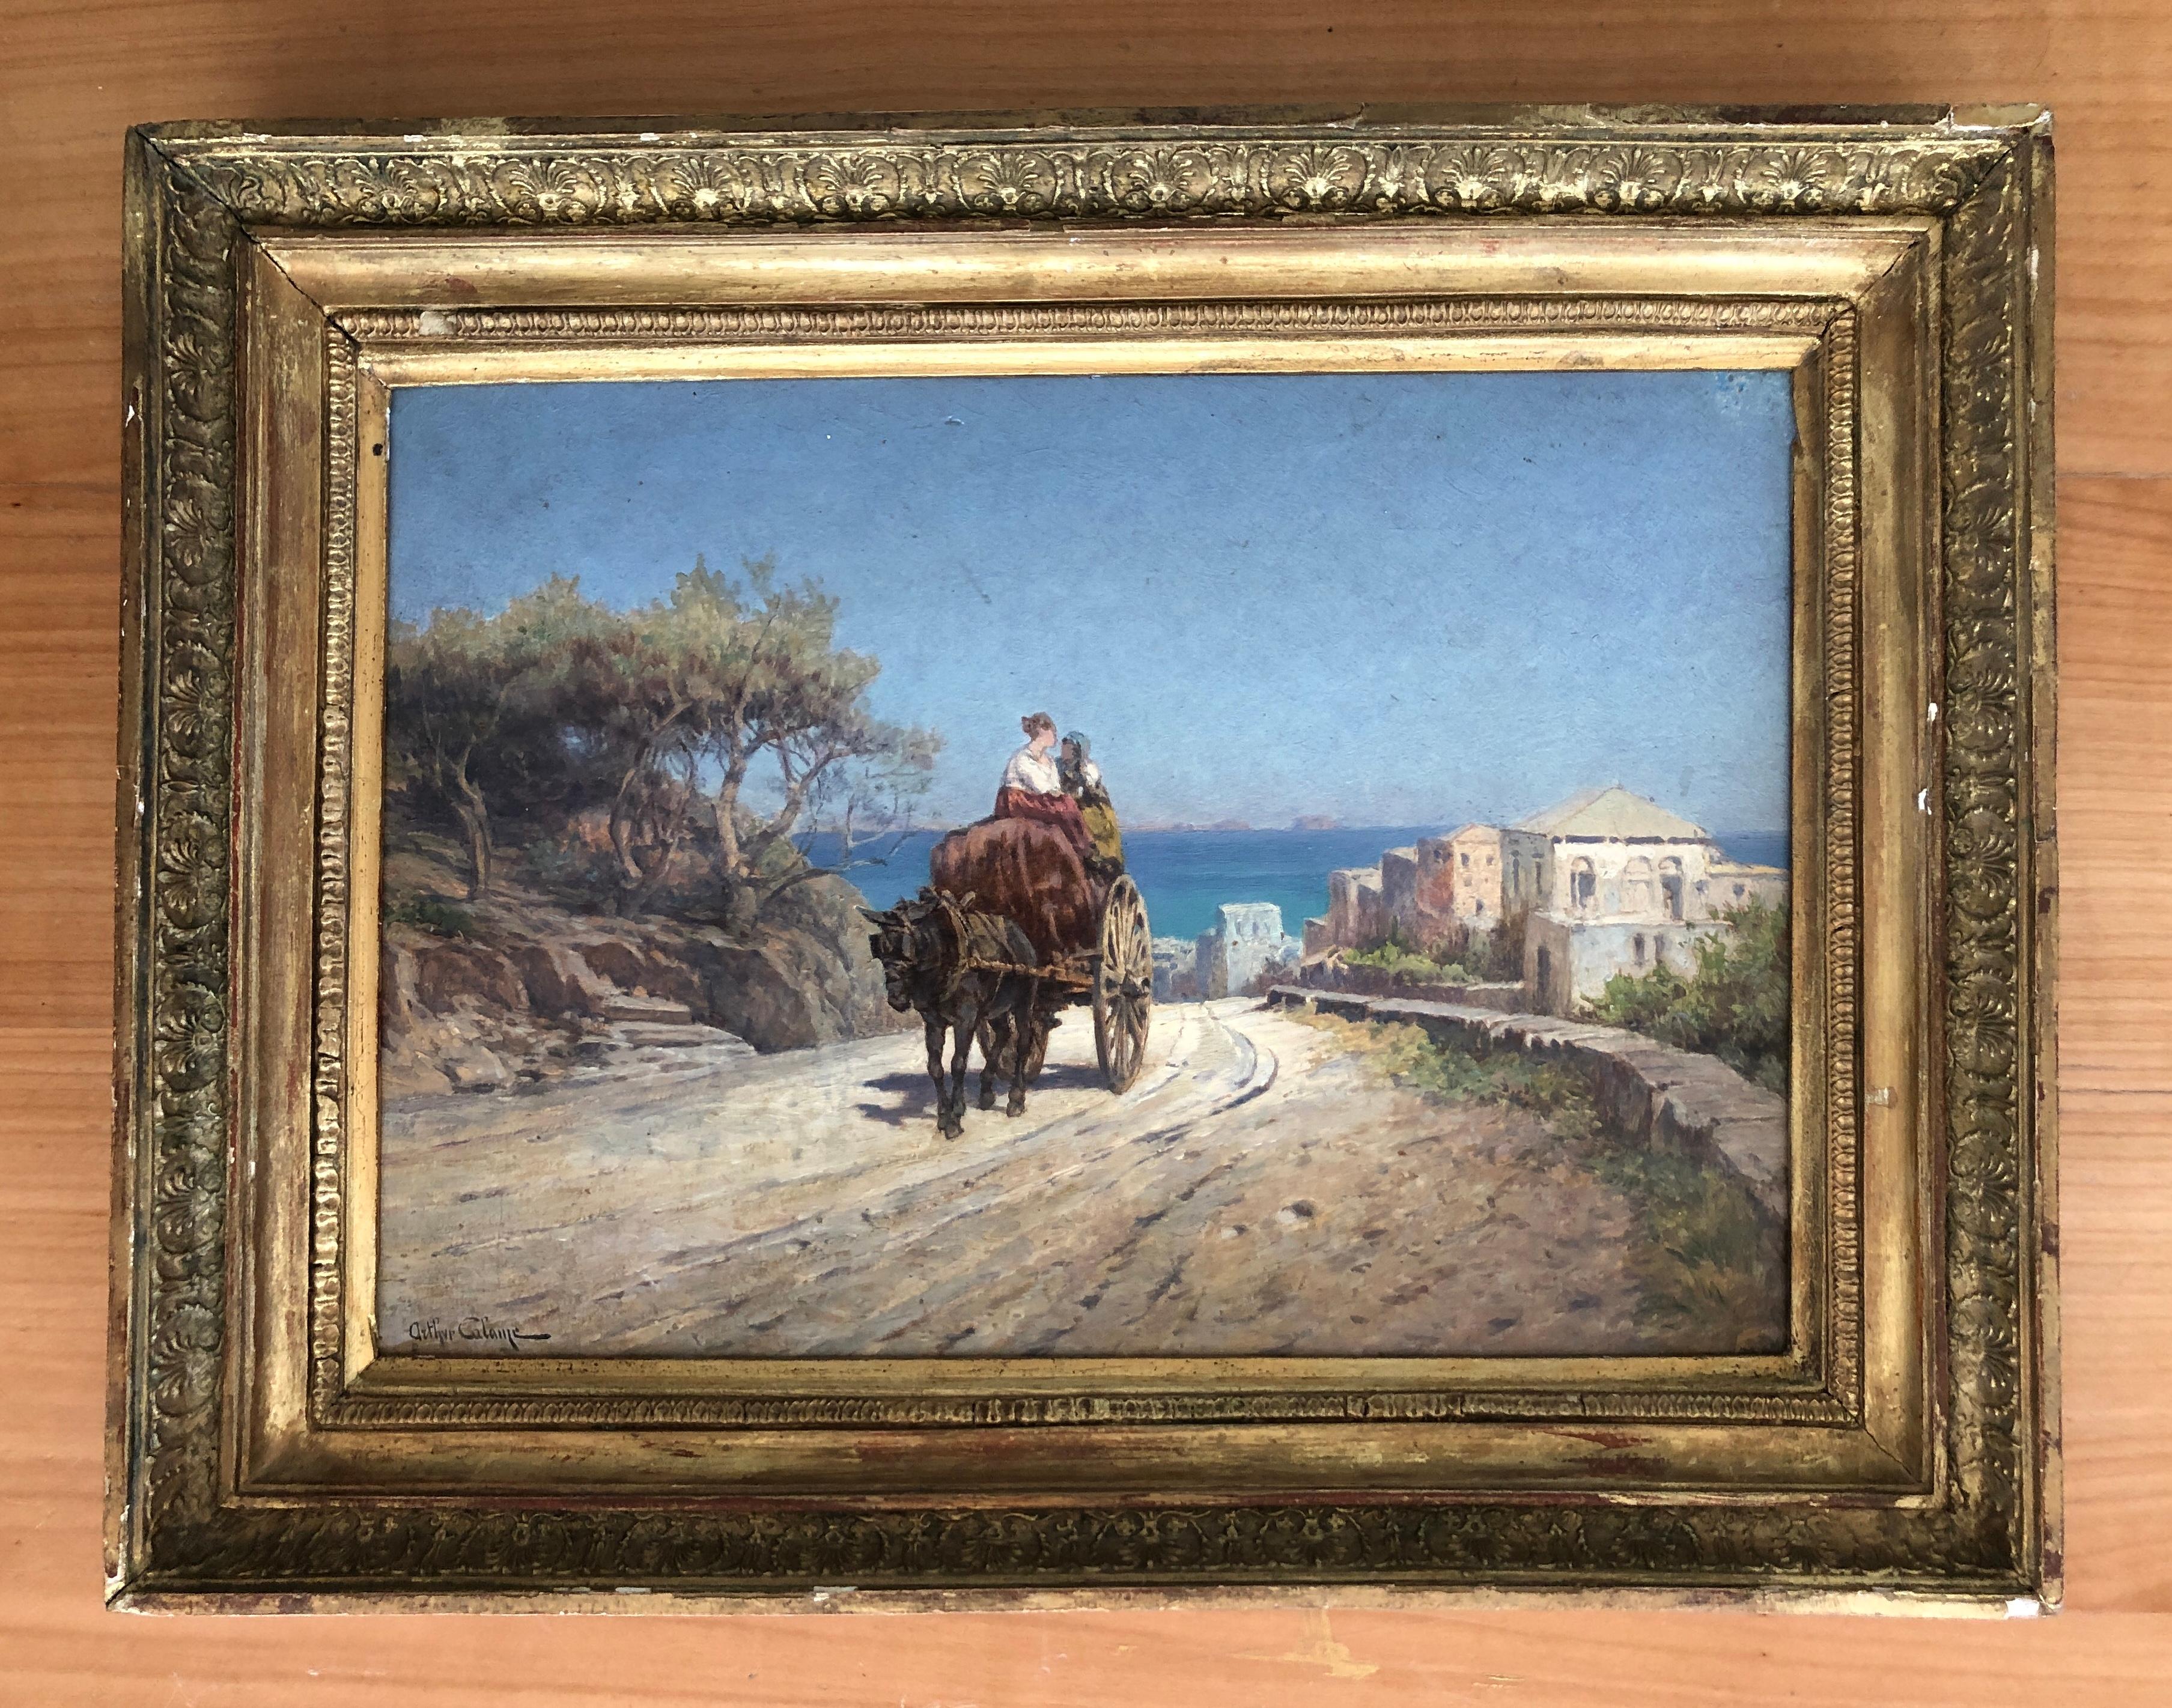 Road to San Remo, mioli hitch - Painting by Arthur Calame